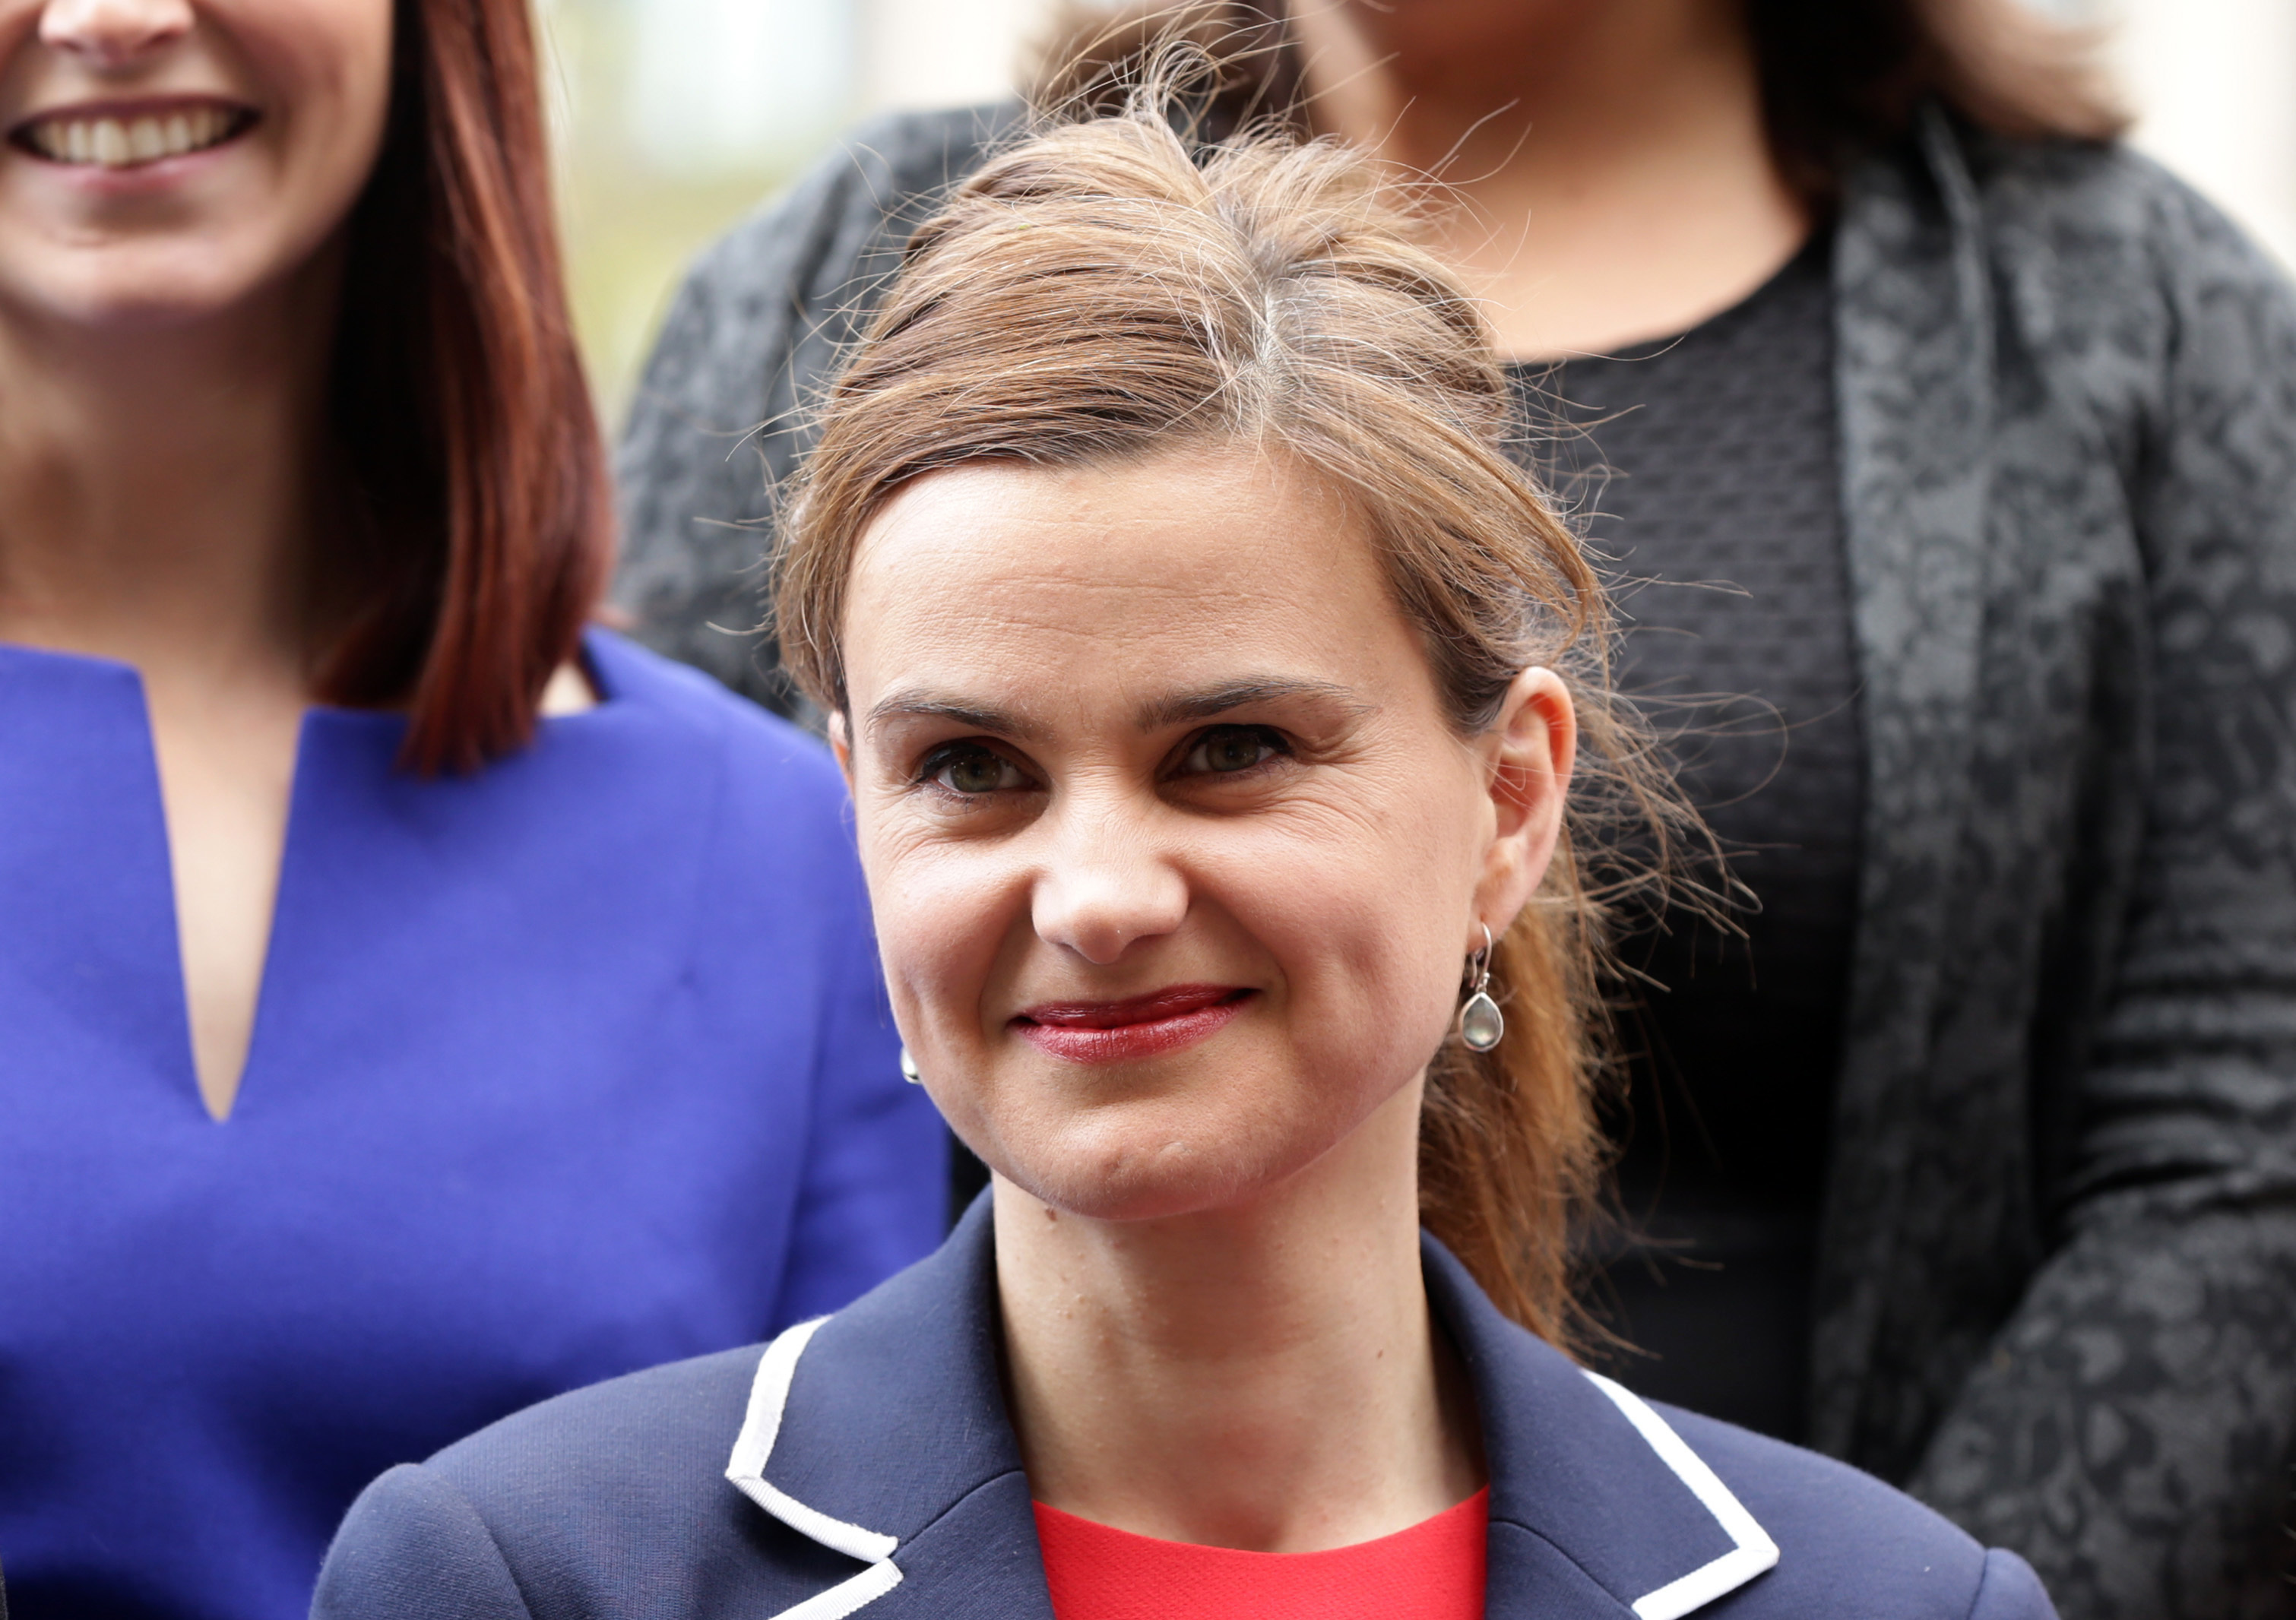 Jo Cox MP who died in the attack on Thursday.